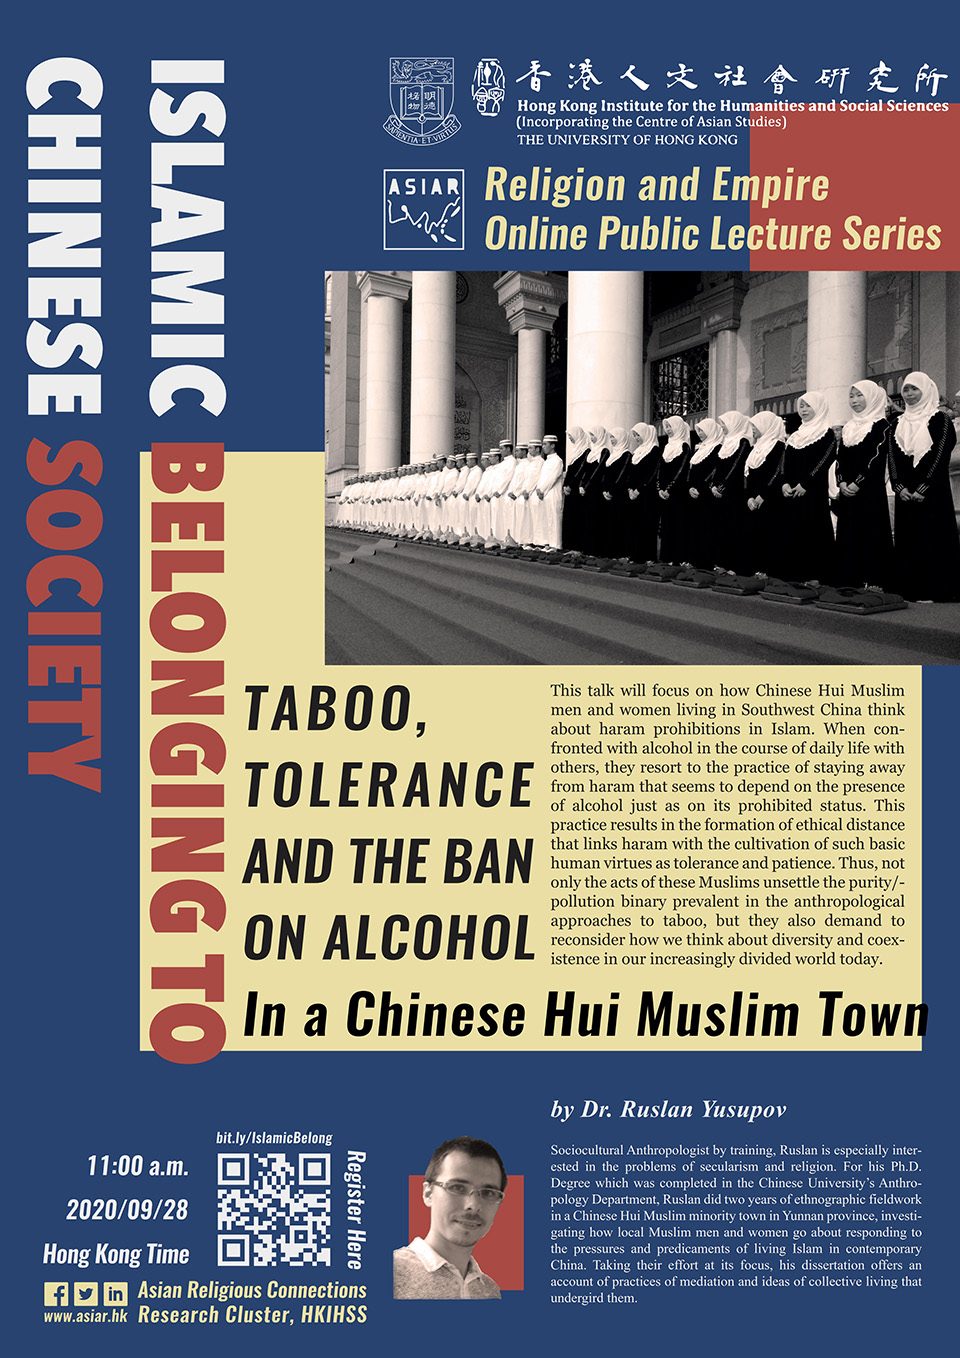 BRINFAITH Religion and Empire Lecture Series on “Islamic Belonging to Chinese Society: Taboo, Tolerance and the Ban on Alcohol in a Chinese Hui Muslim Town” by Dr. Ruslan Yusupov (September 28, 2020)